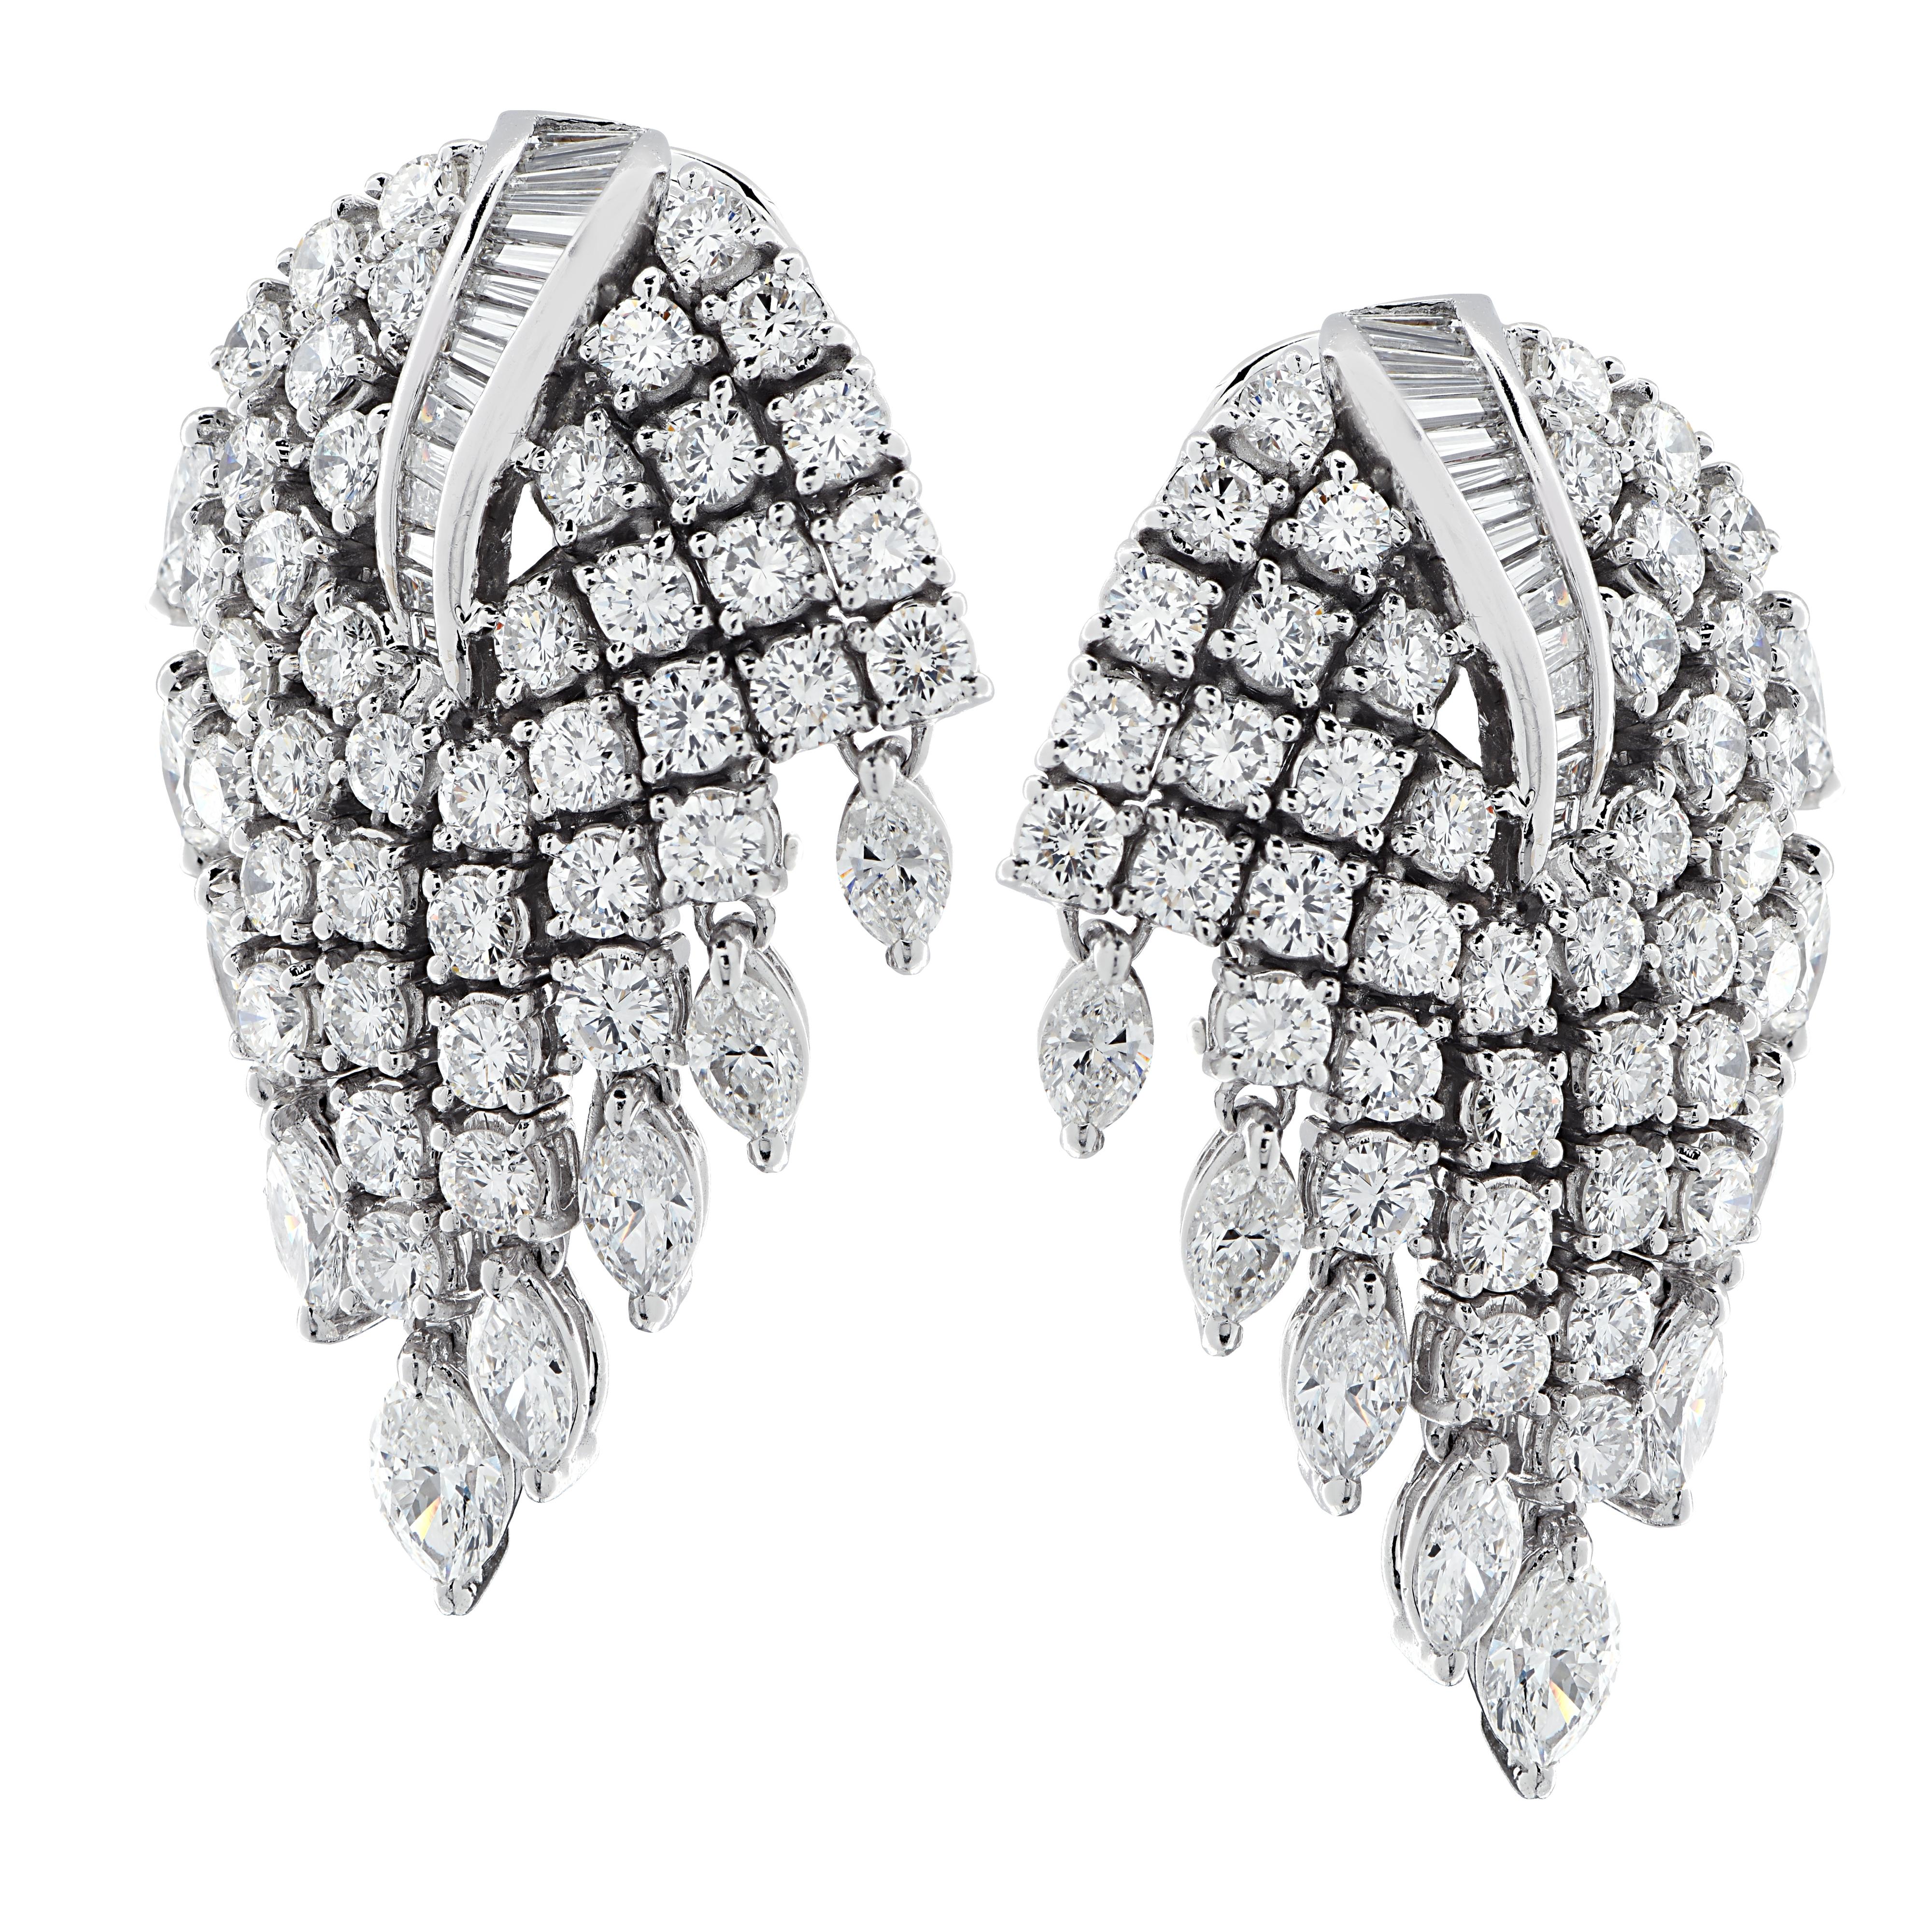 Glamorous clip on earrings crafted in platinum featuring 132 round brilliant cut, marquise and baguette diamonds weighing 7.25 carats total, F color VS clarity. Rows of round brilliant cut diamonds with a marquise drop cascade from a baguette